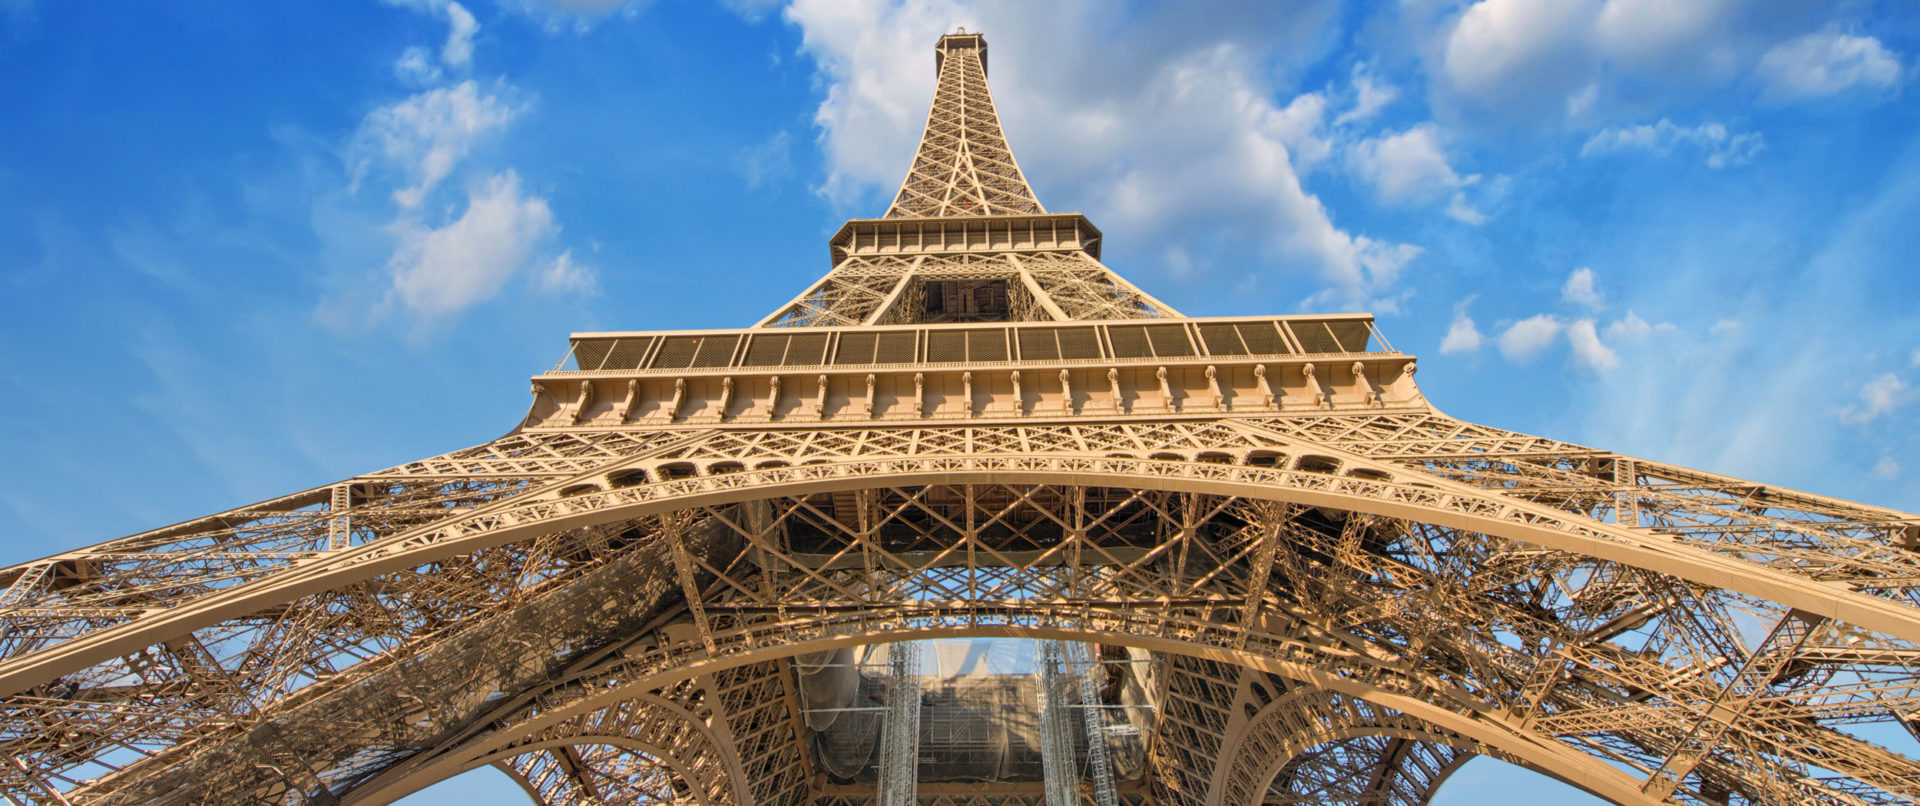 tour-eiffel-teenagers-experience-with-side-car-ride